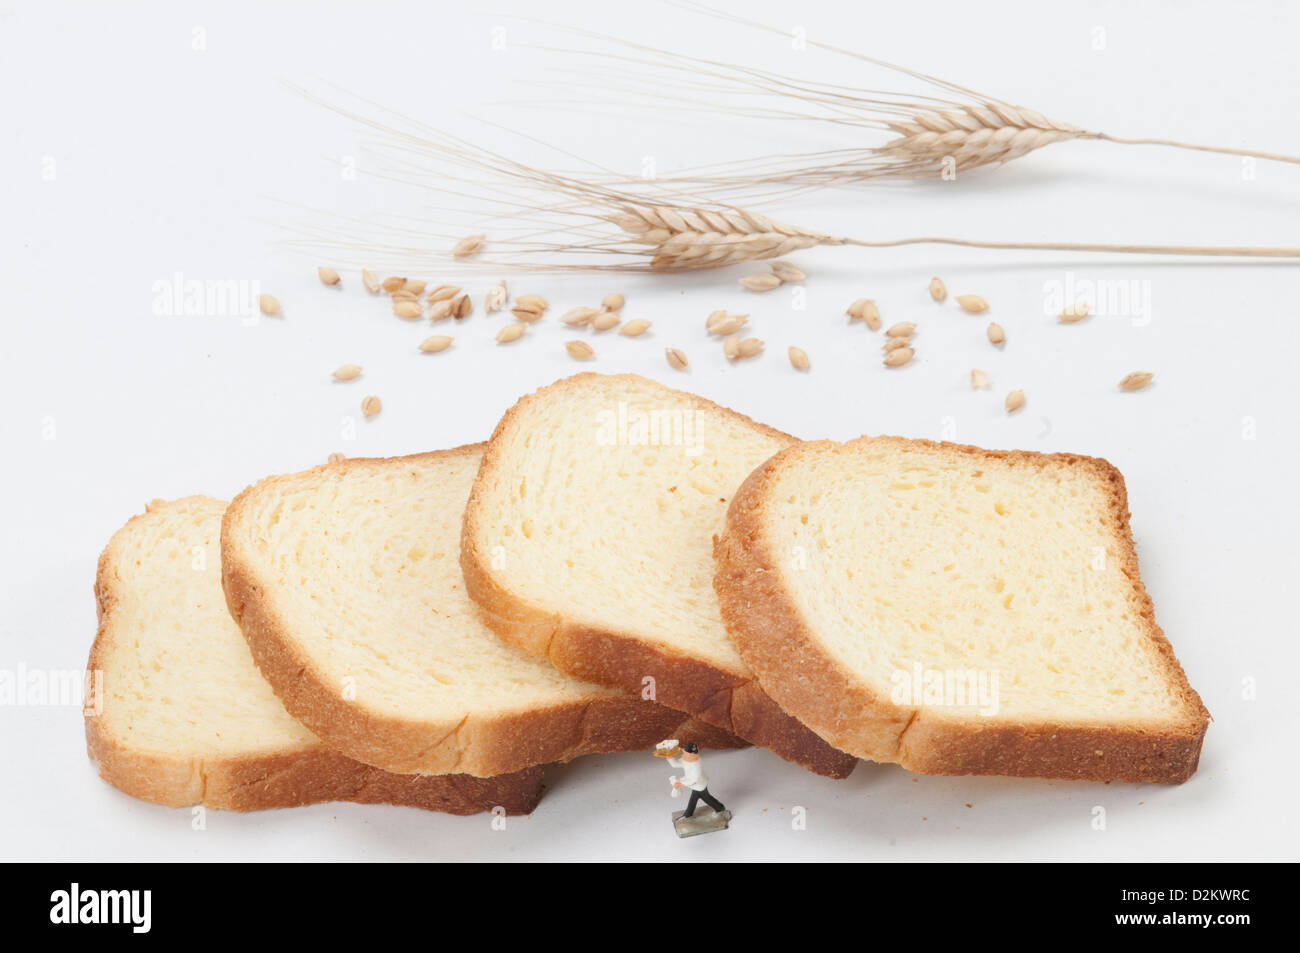 Ears of wheat and slices of bread Stock Photo